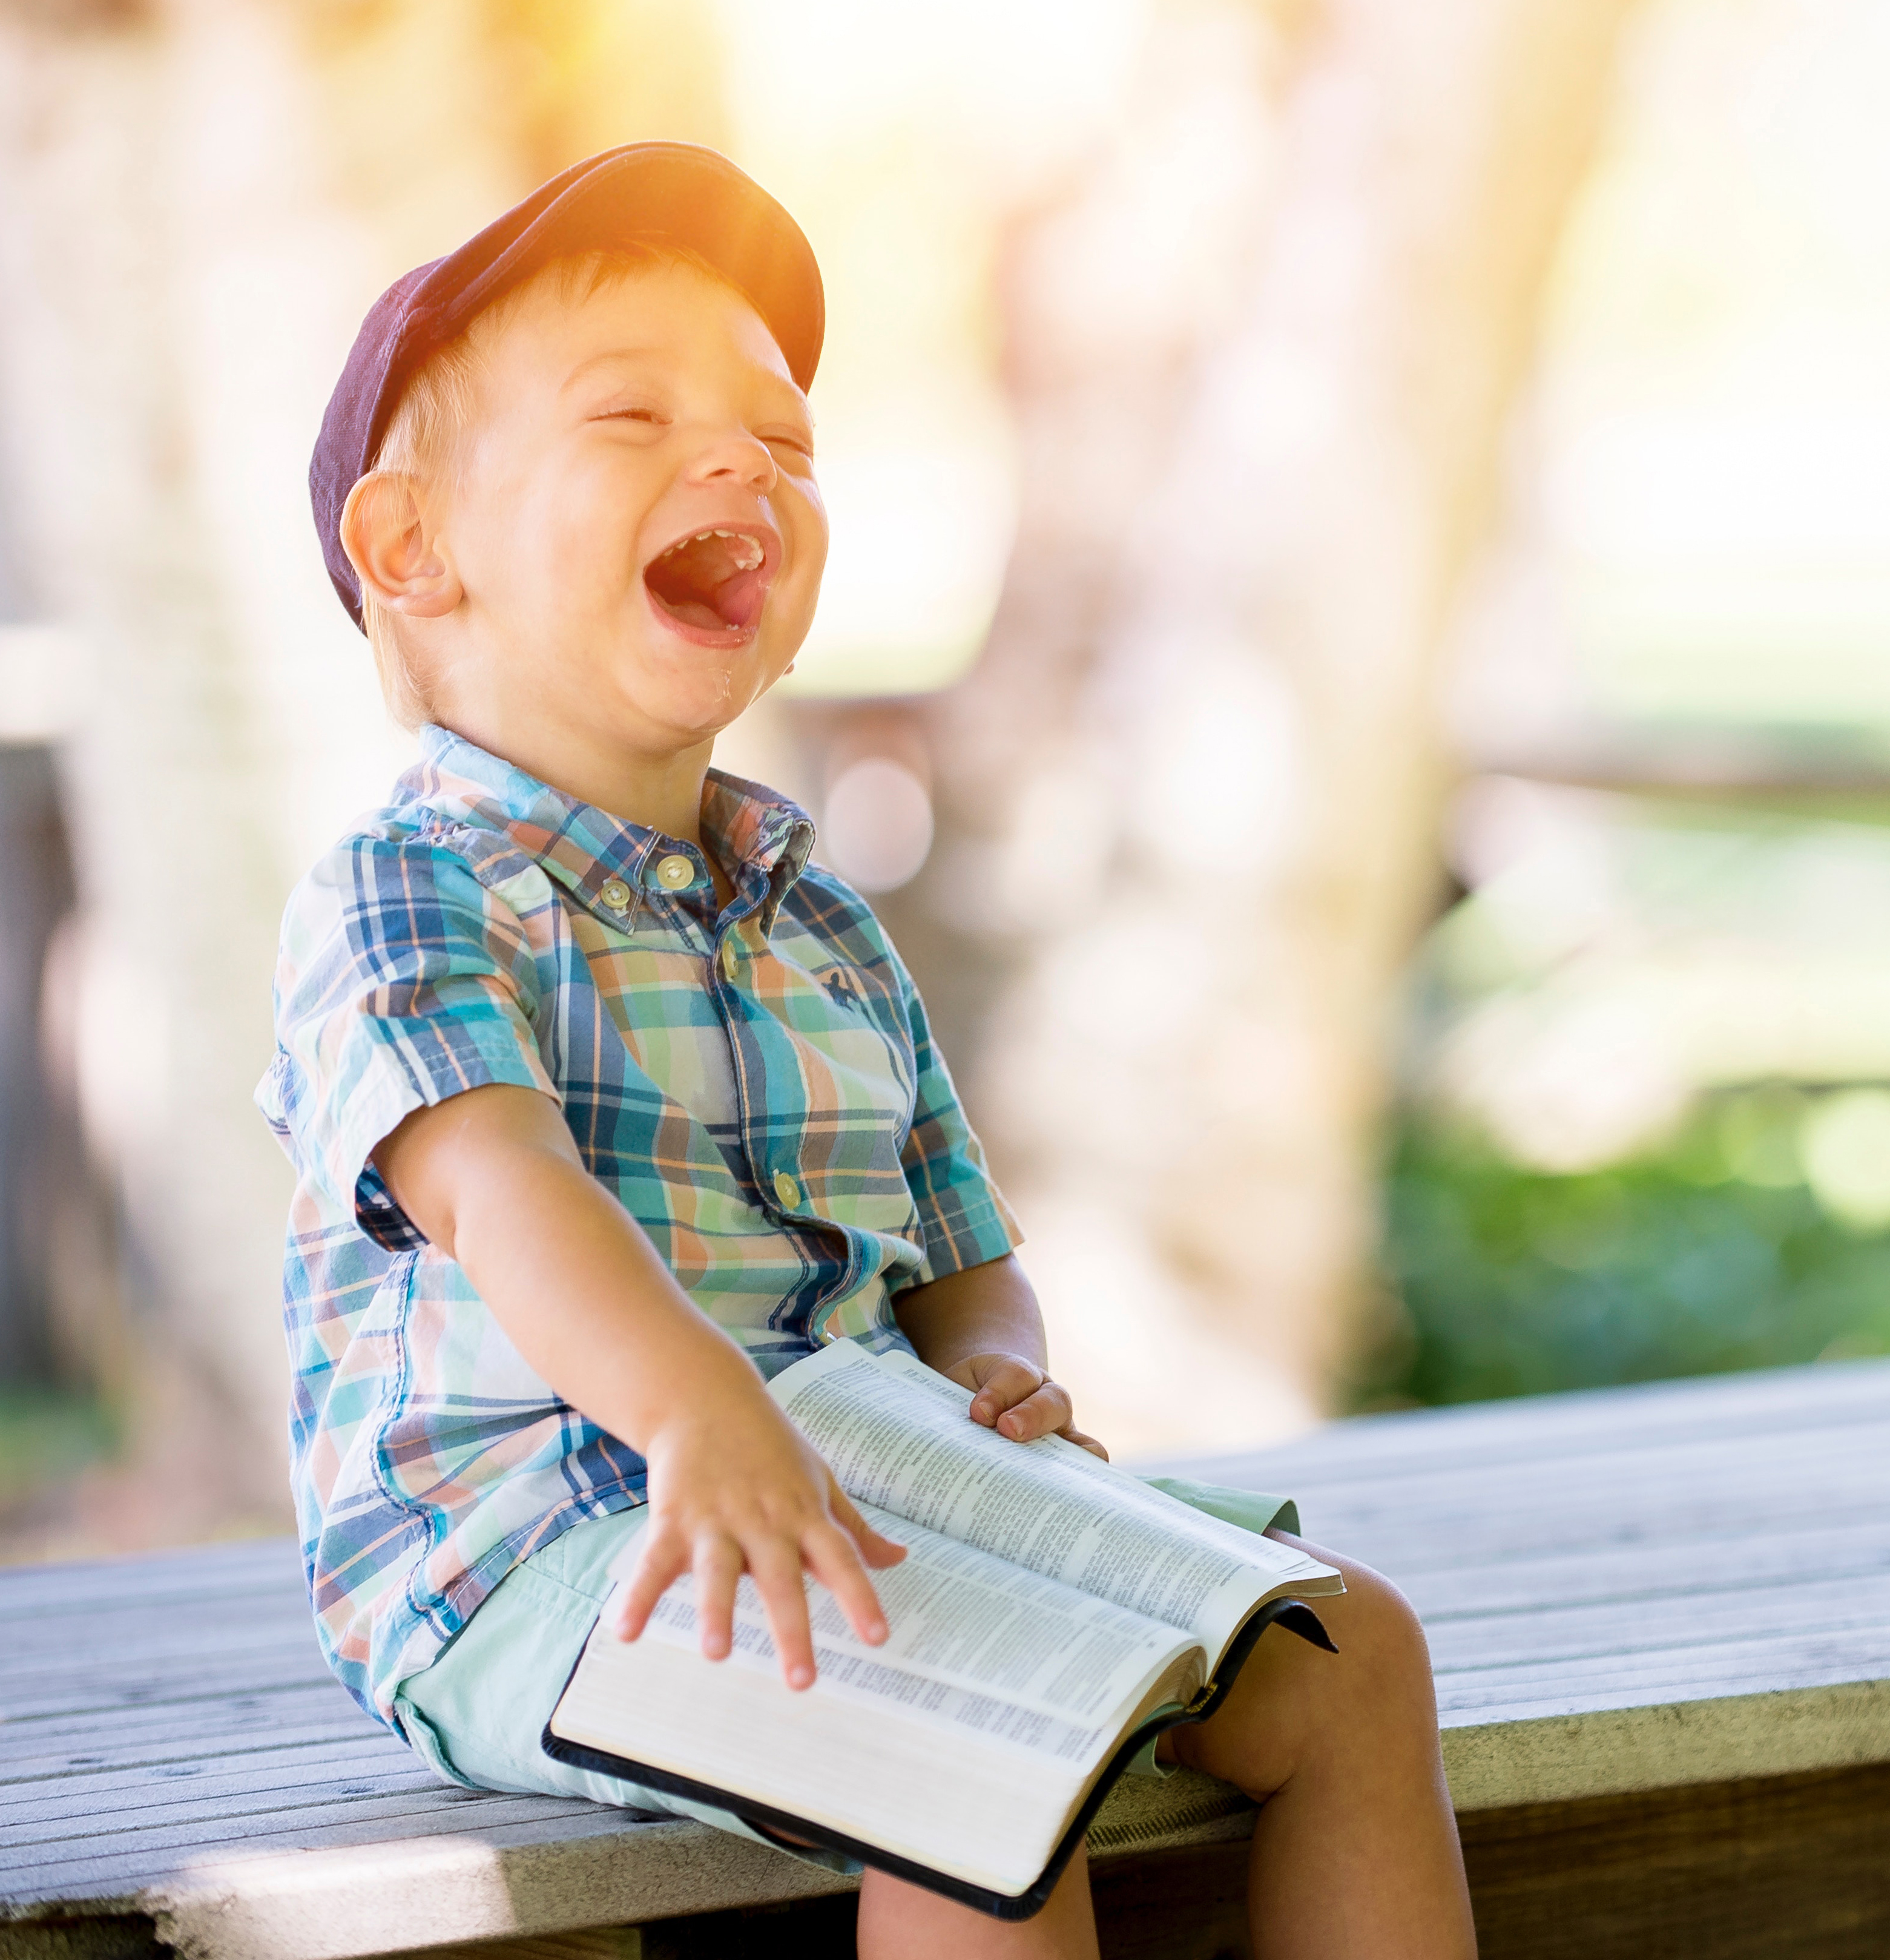 An image of a laughing child who is reading a book.